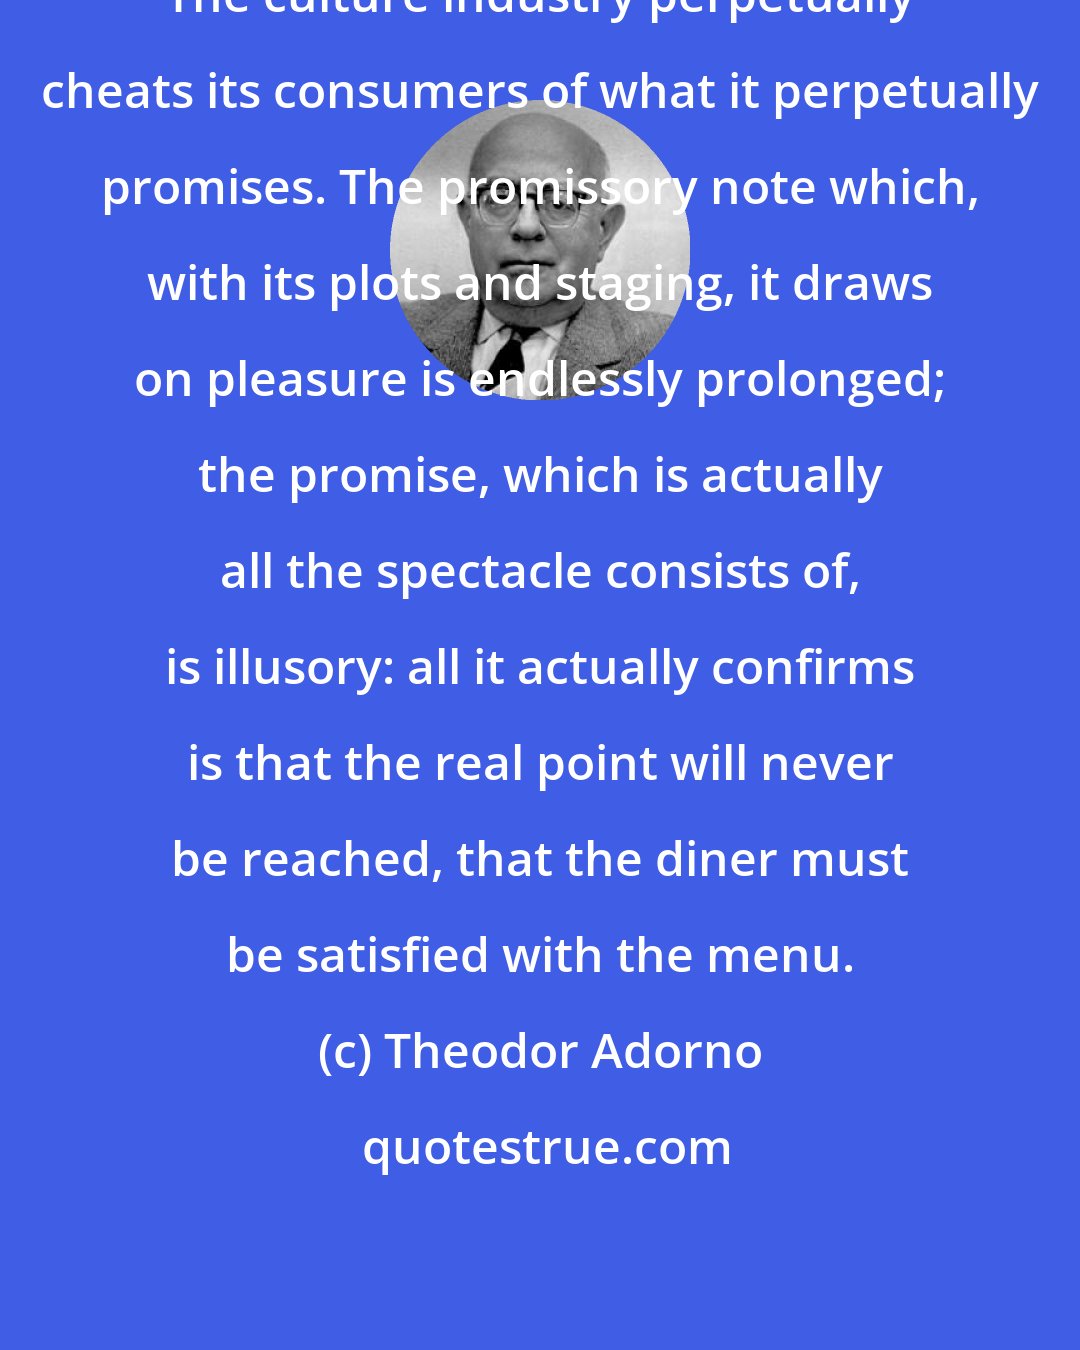 Theodor Adorno: The culture industry perpetually cheats its consumers of what it perpetually promises. The promissory note which, with its plots and staging, it draws on pleasure is endlessly prolonged; the promise, which is actually all the spectacle consists of, is illusory: all it actually confirms is that the real point will never be reached, that the diner must be satisfied with the menu.